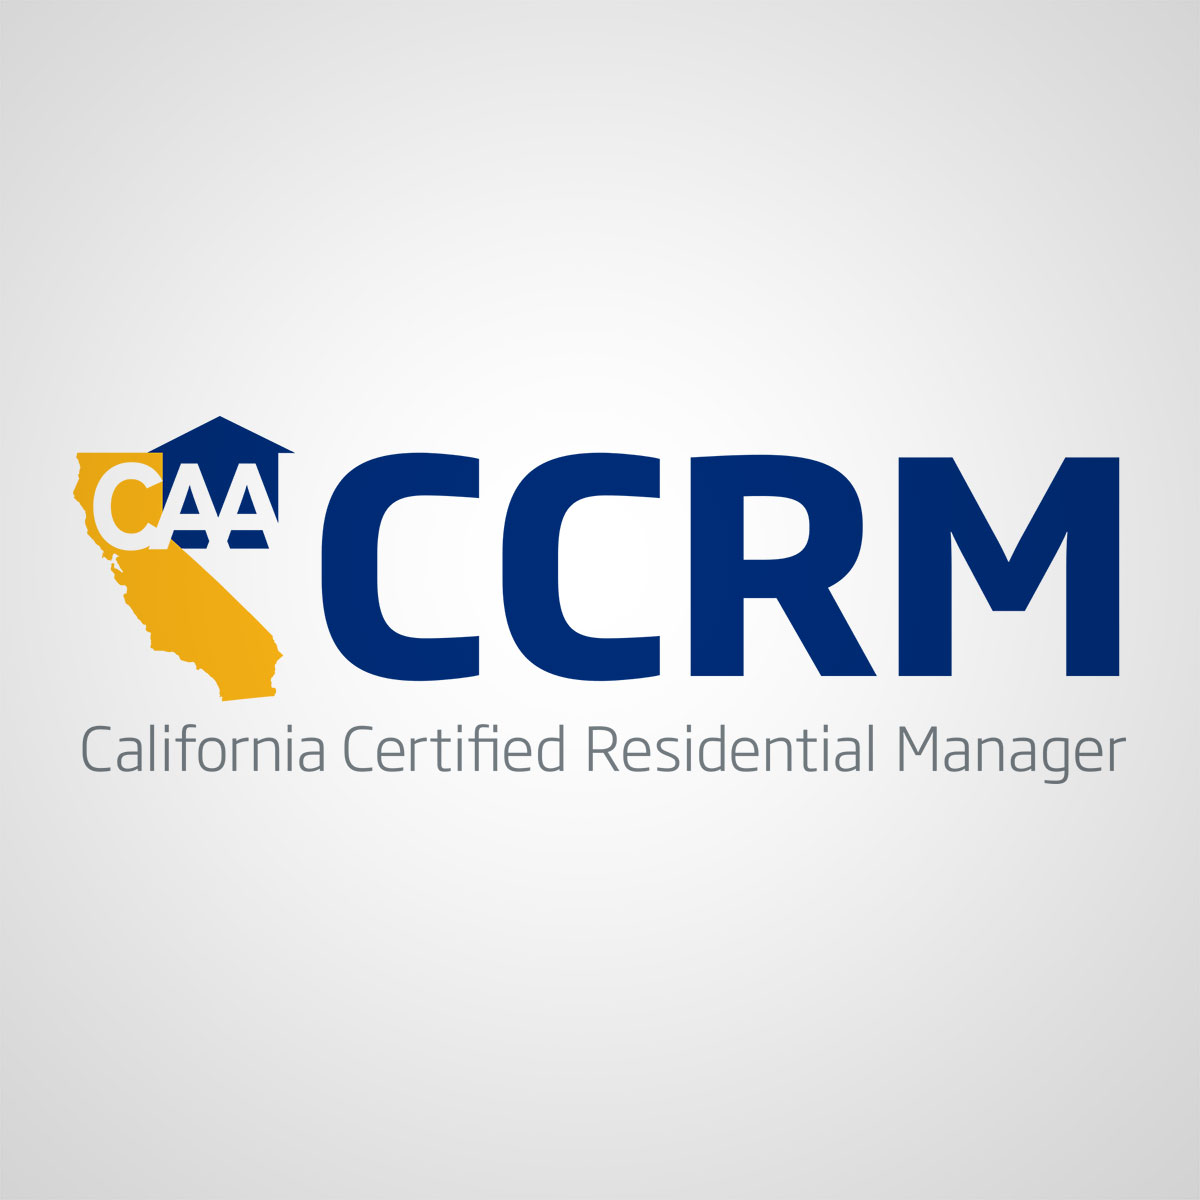 CCRM Fall 2019 Series